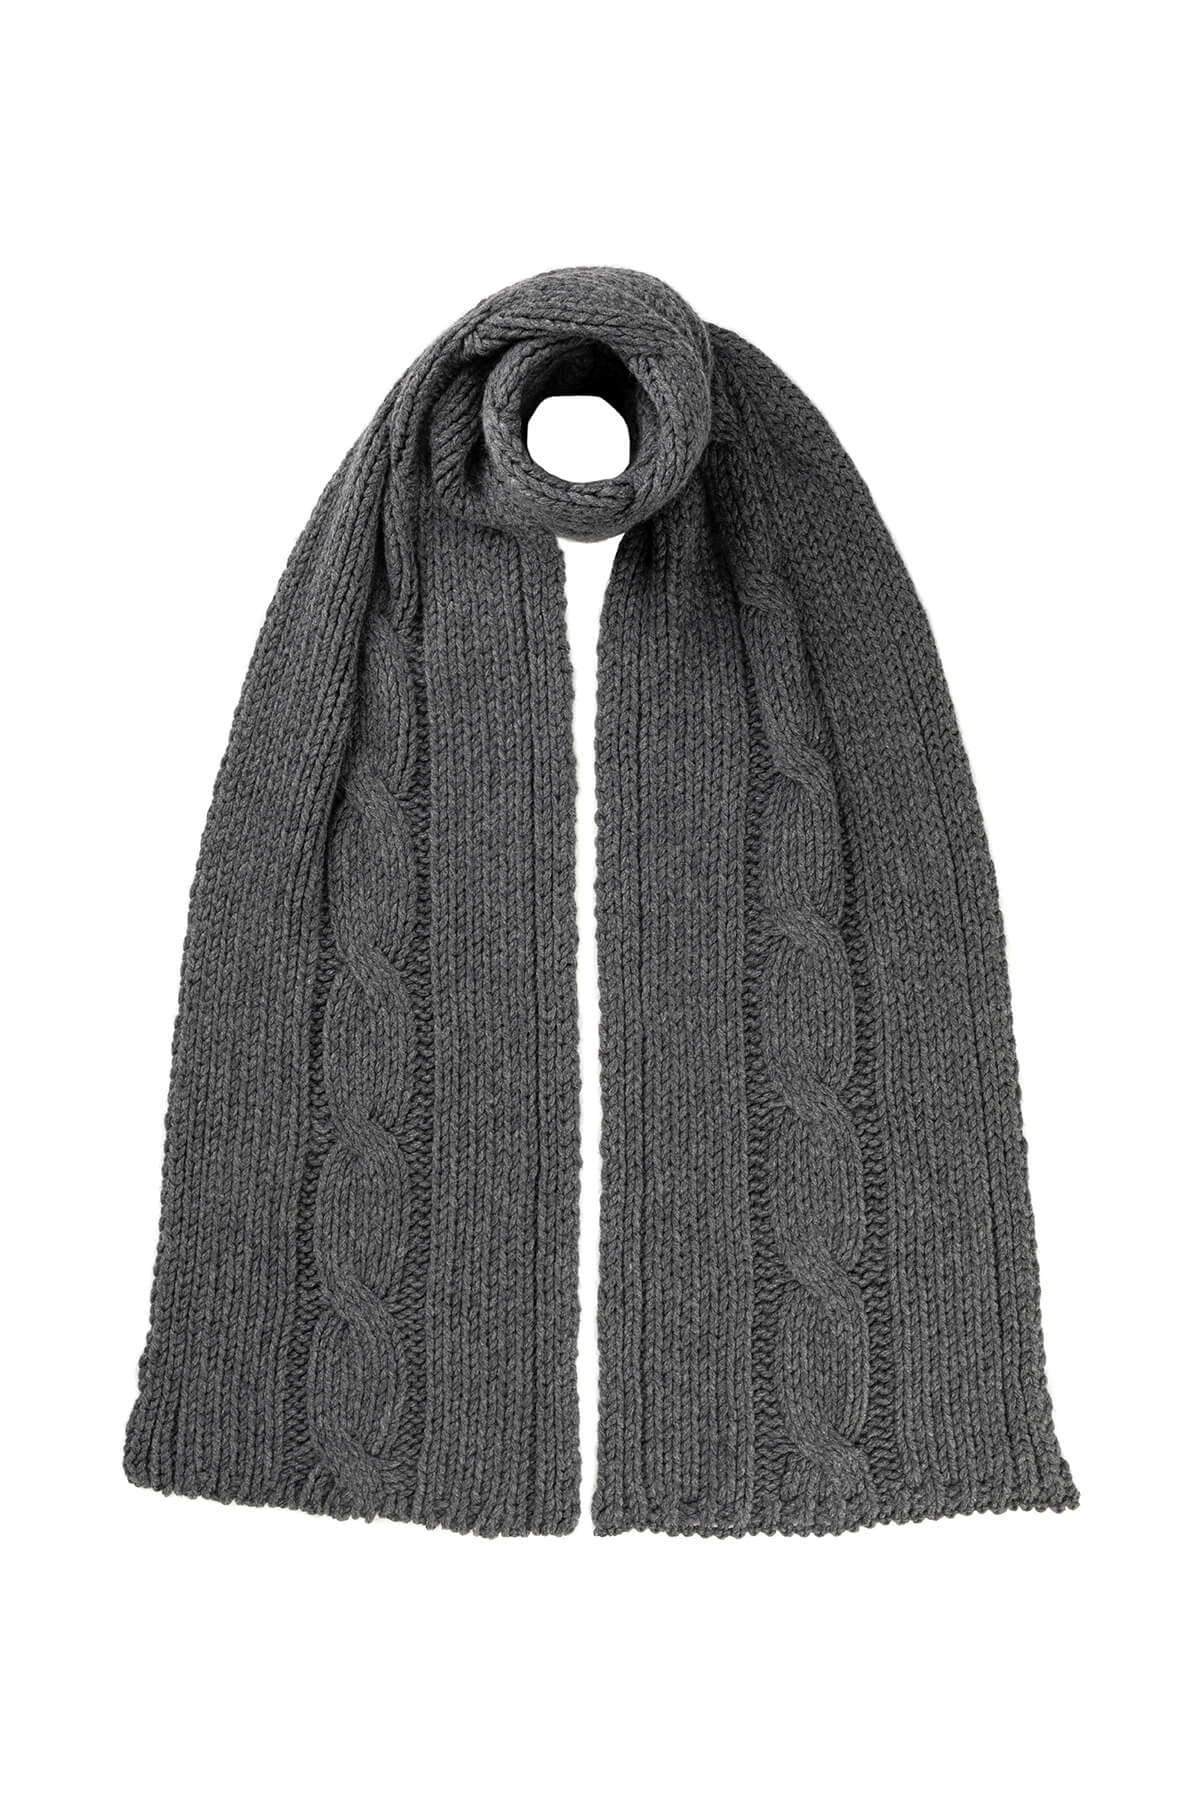 Johnstons of Elgin’s Mid Grey Luxe Chunky Cable Cashmere Scarf on a white background HAB03195HA4181